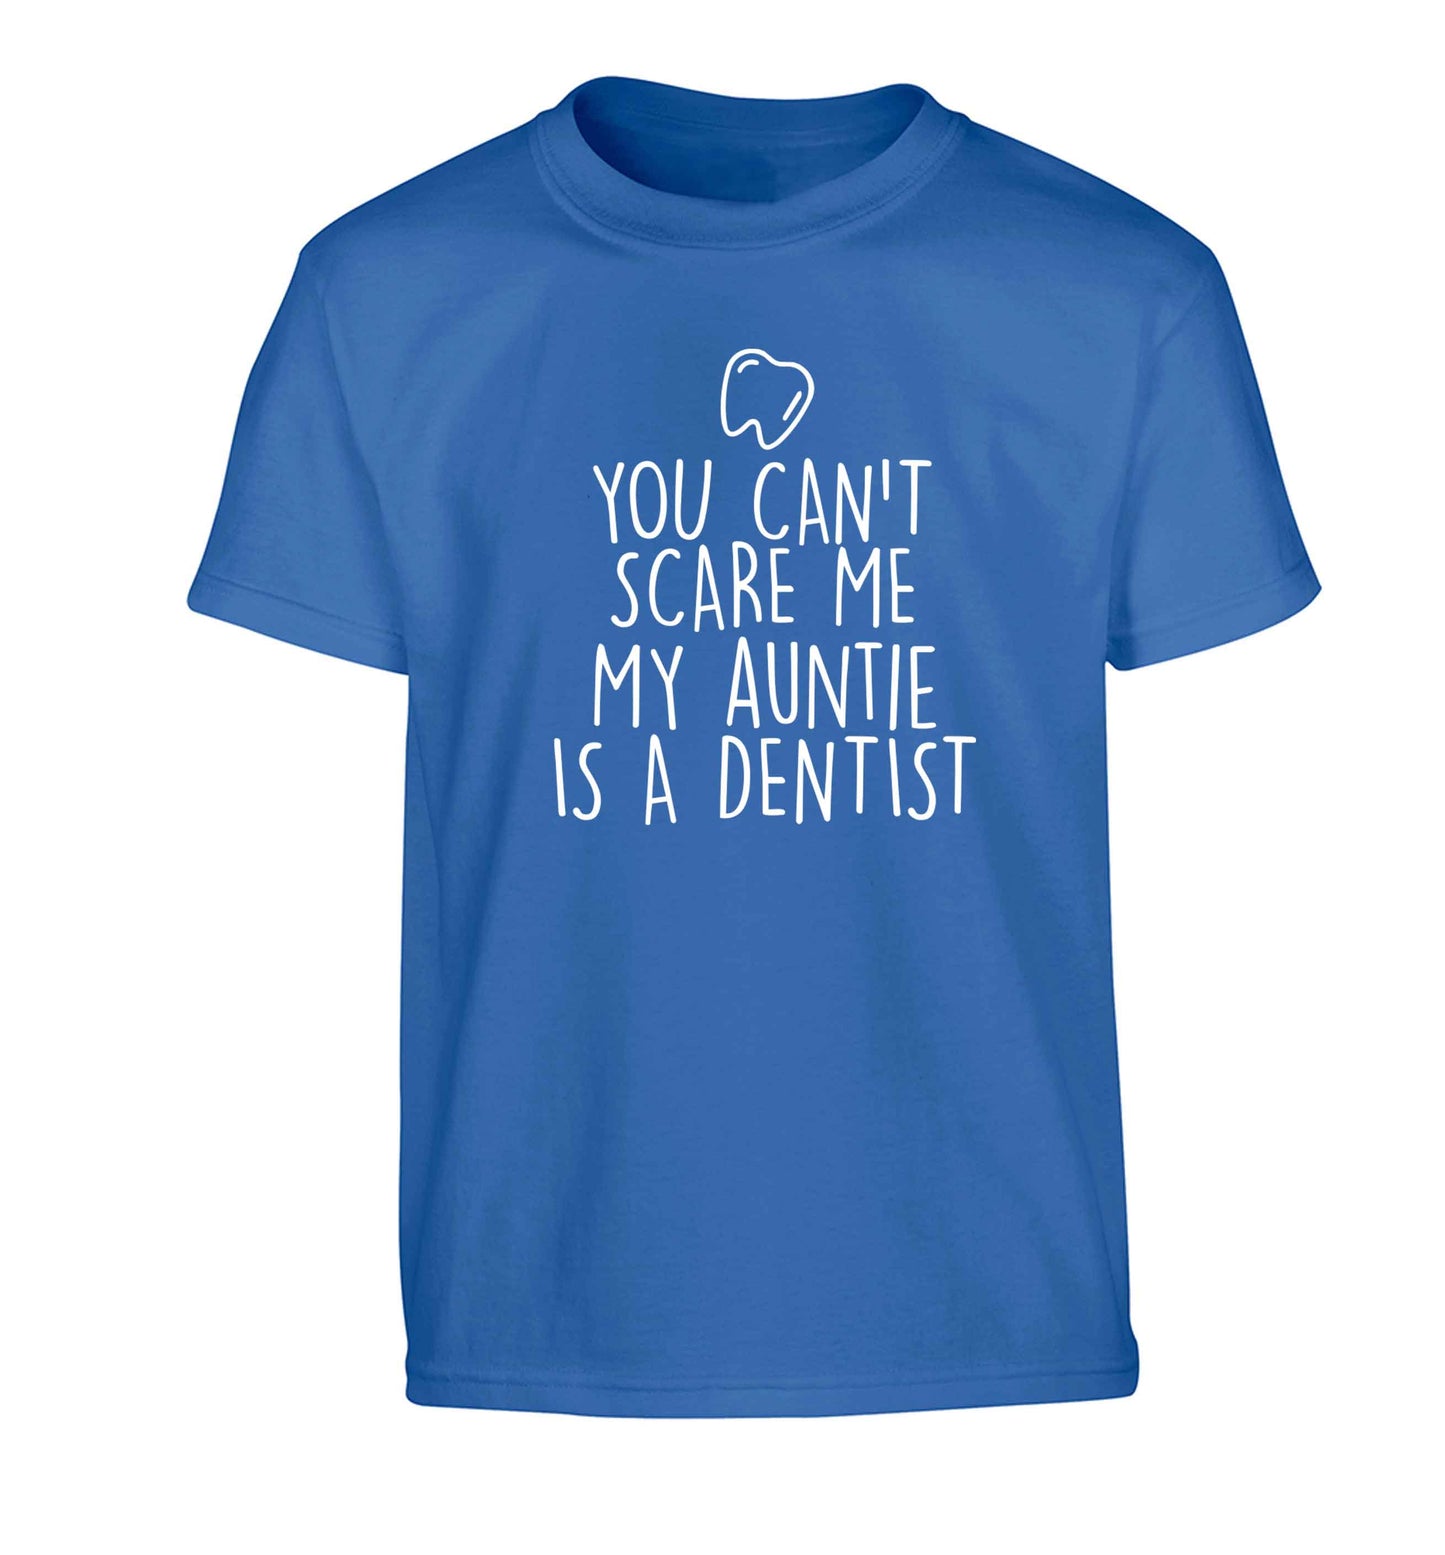 You can't scare me my auntie is a dentist Children's blue Tshirt 12-13 Years